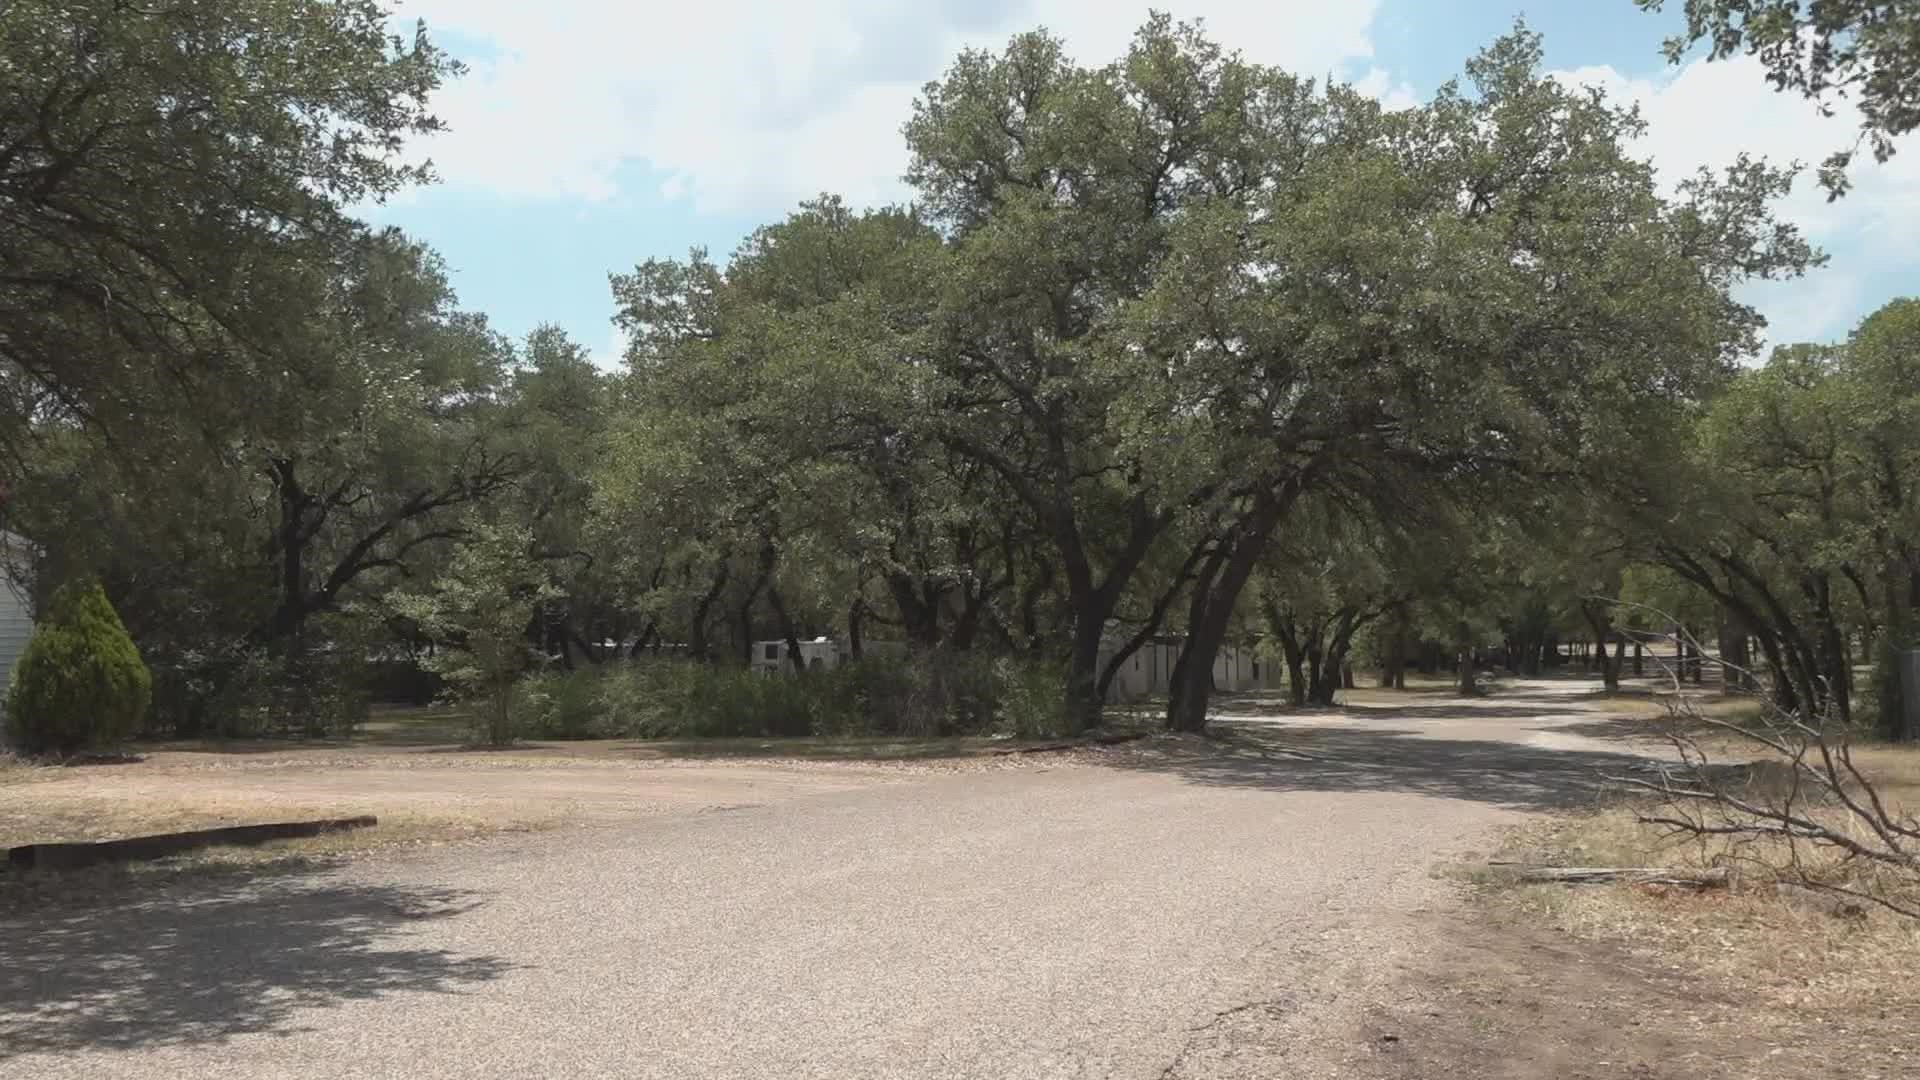 Community members say a new RV resort does not fit in a residential area, while others say it would bring needed revenue and tourism to Belton.